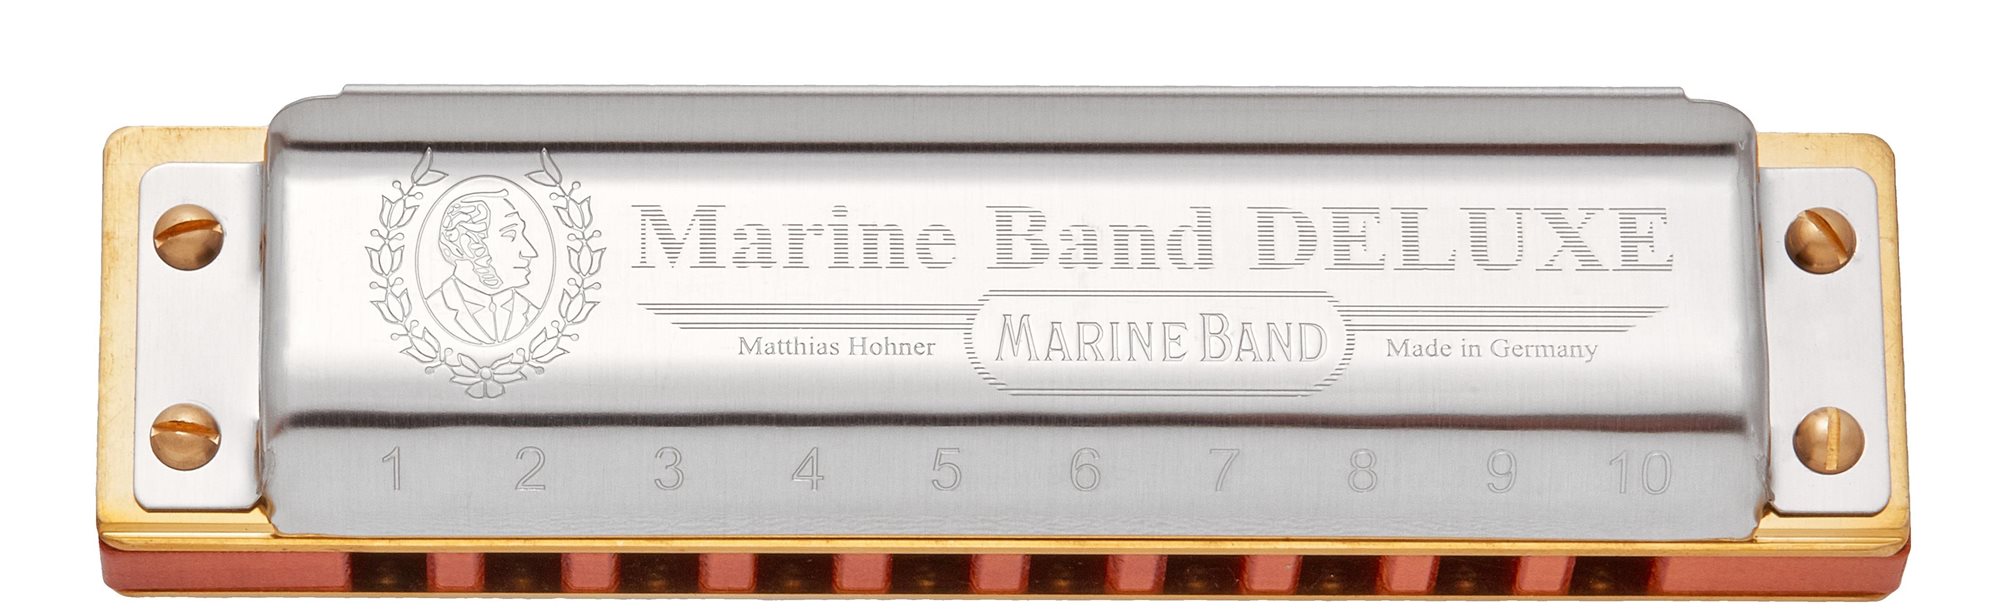 HOHNER Marine Band Deluxe D-dúr